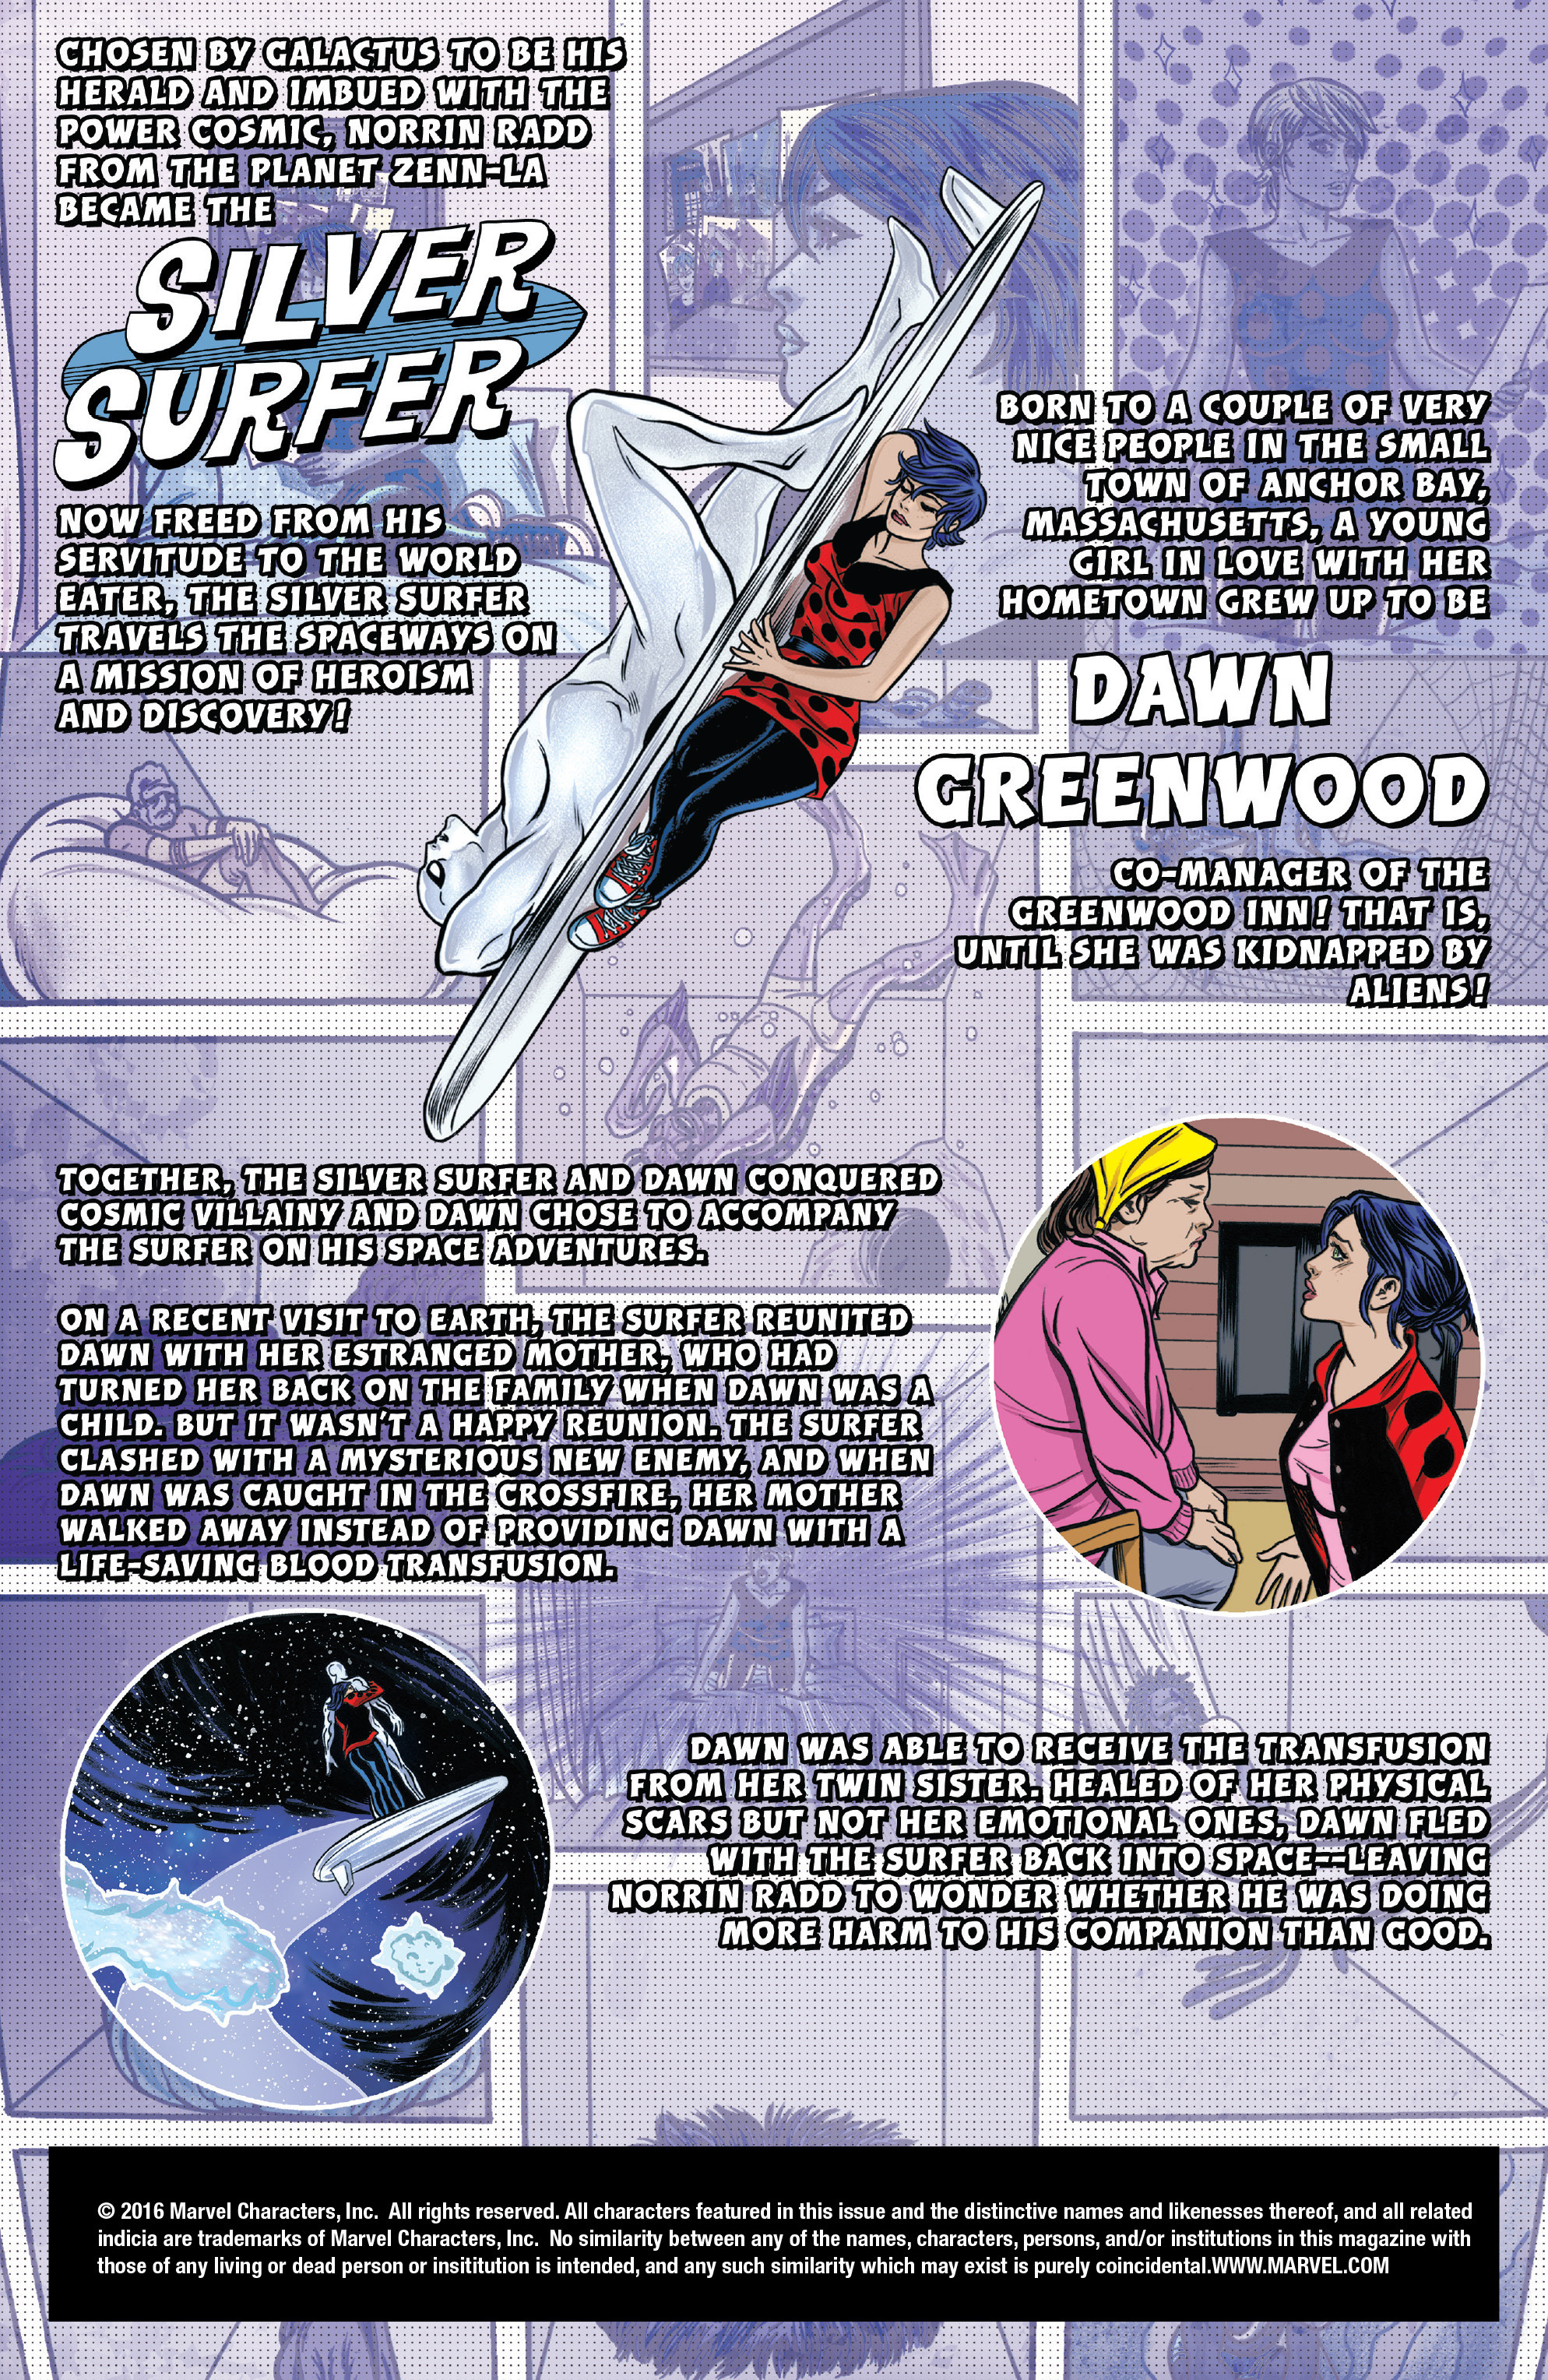 Silver Surfer (2016-): Chapter 7 - Page 2